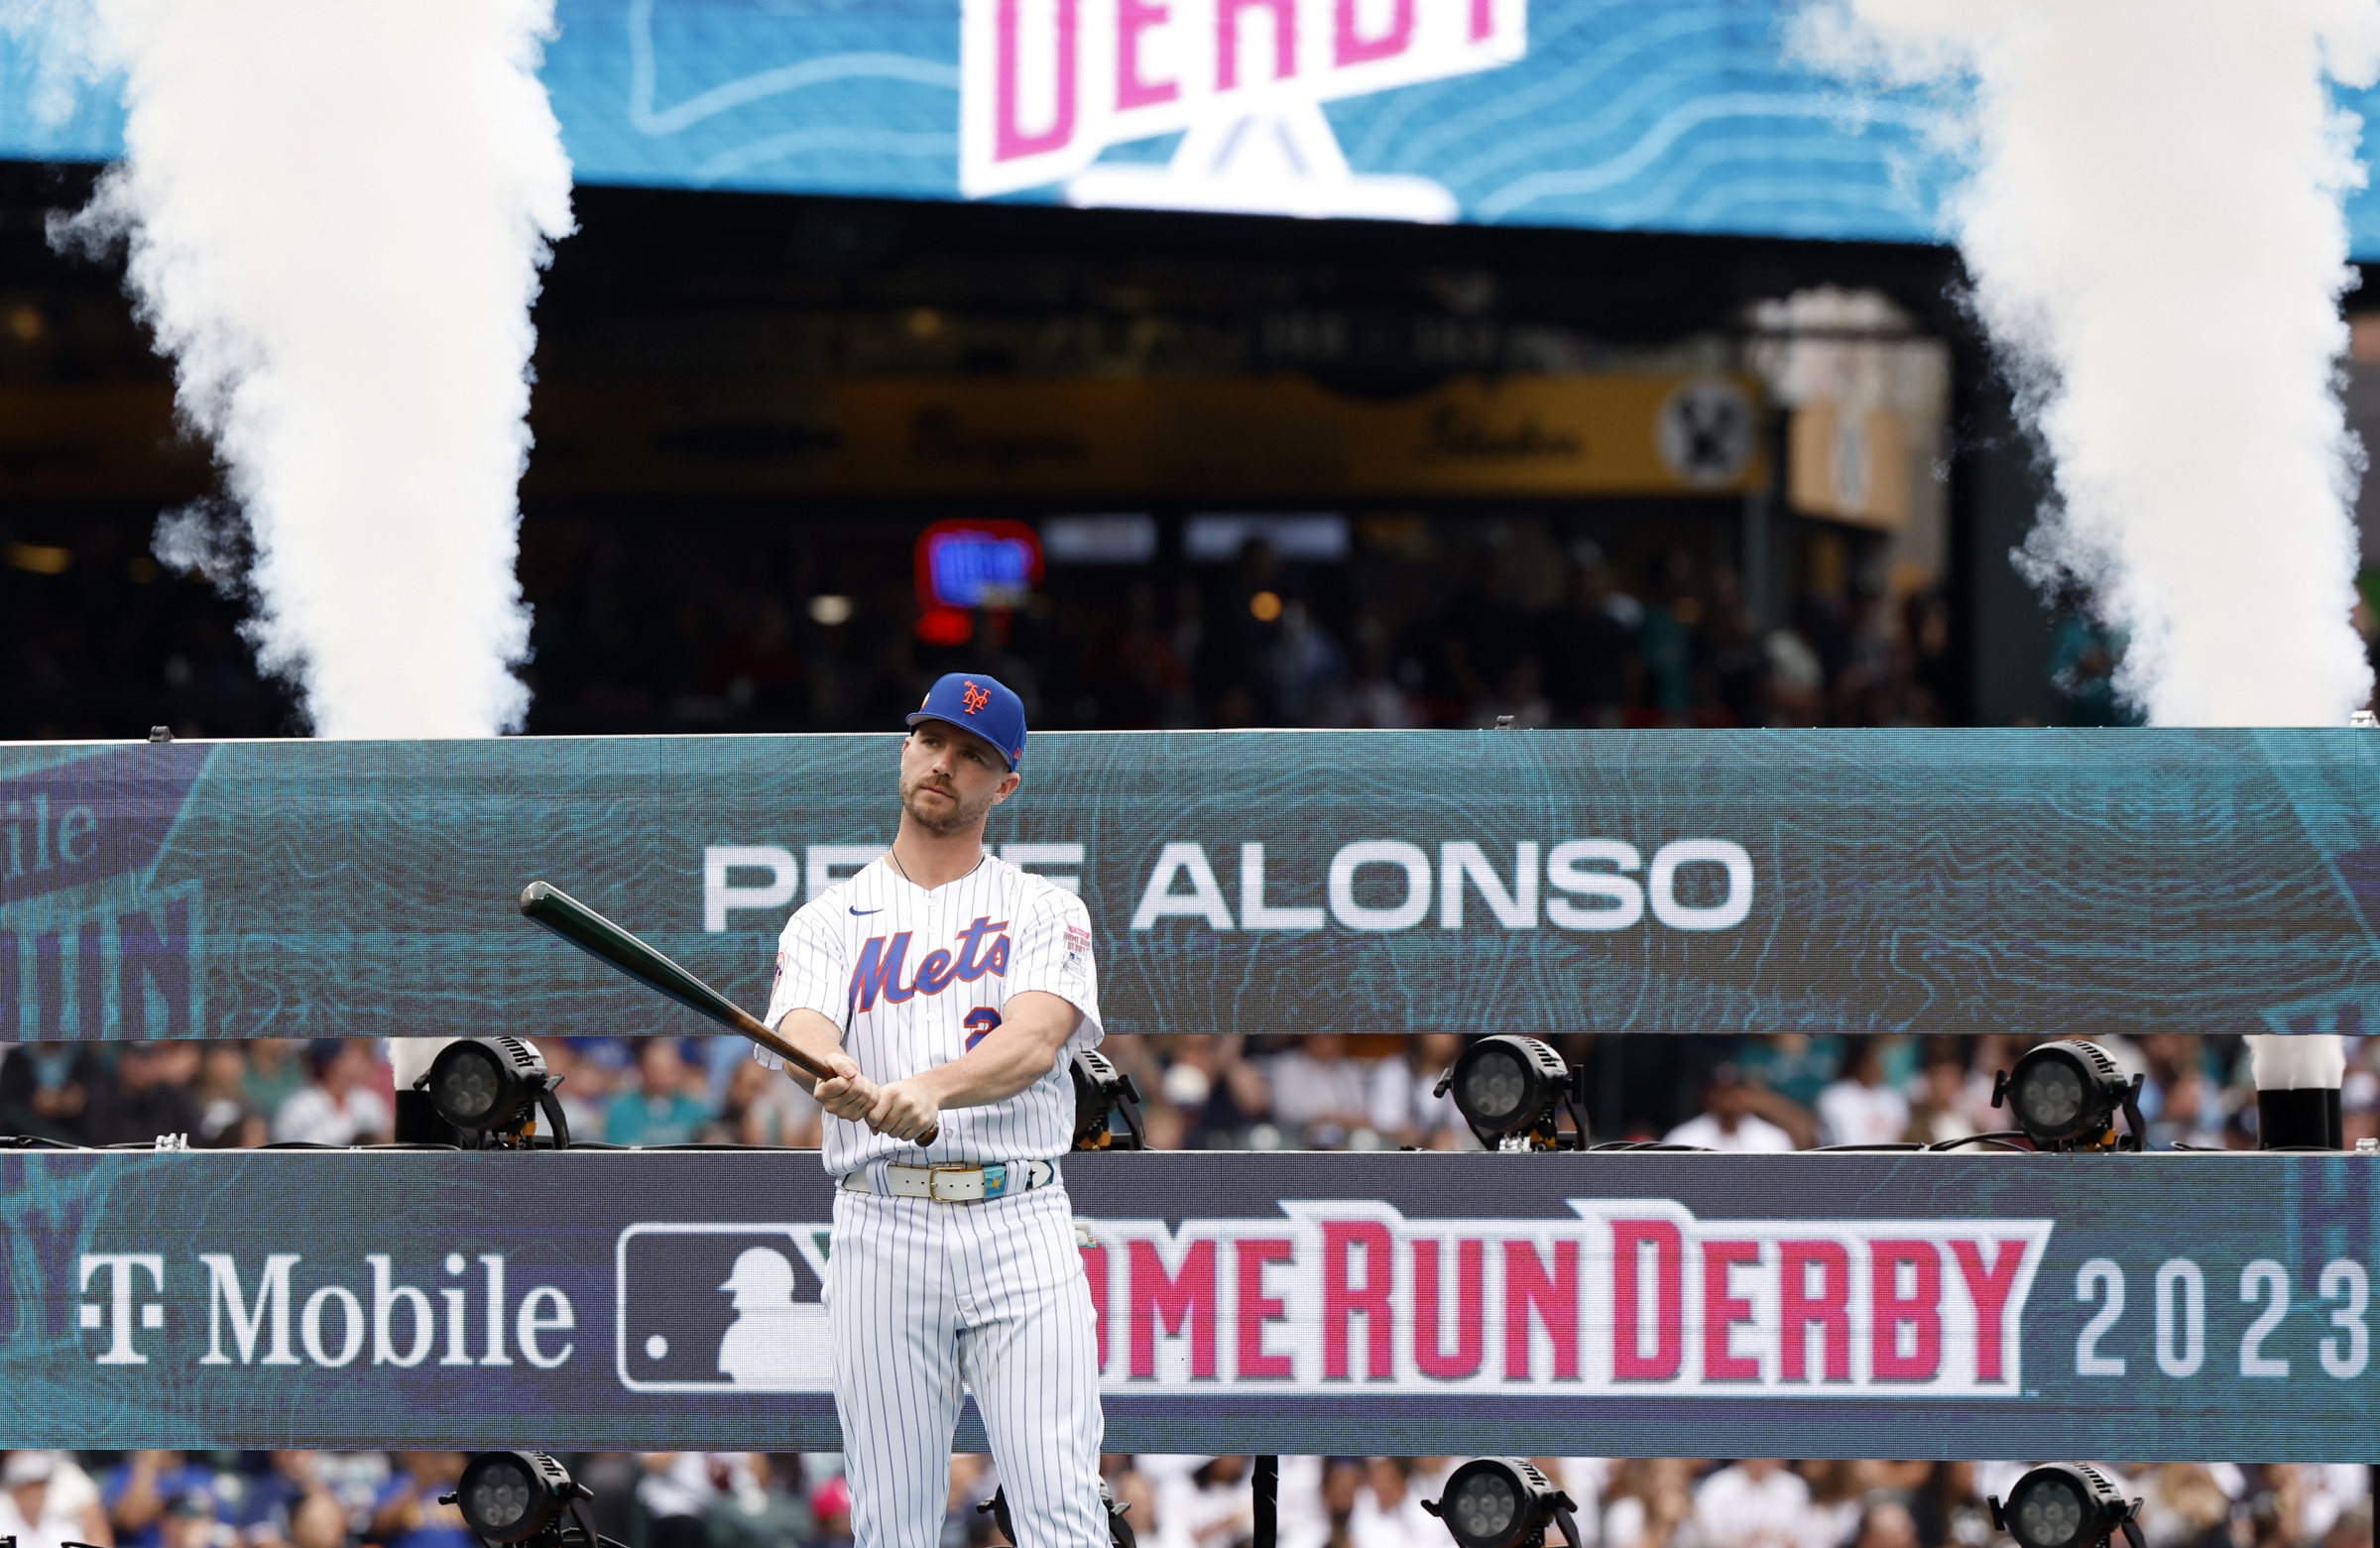 pete alonso home run derby funny